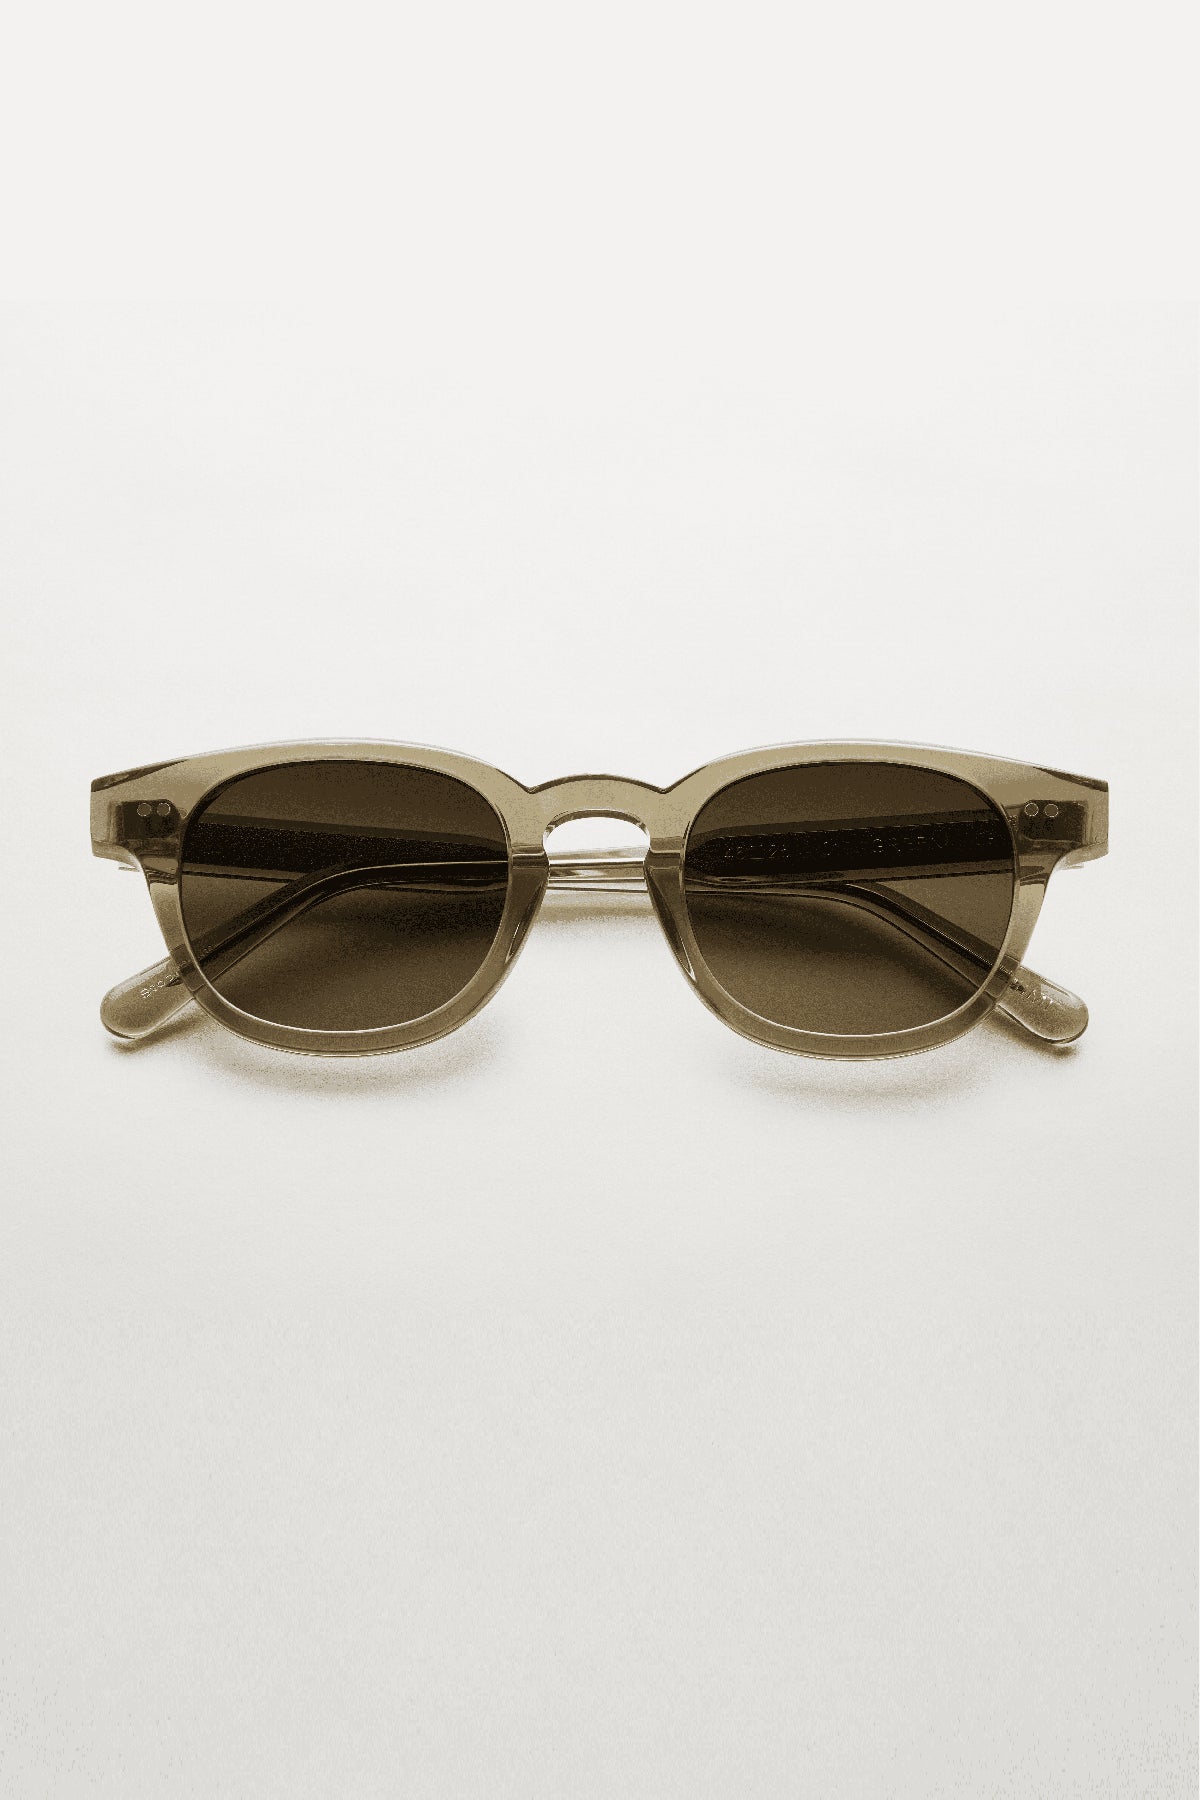 Chimi 01 Sunglasses Green Front-22132427260097